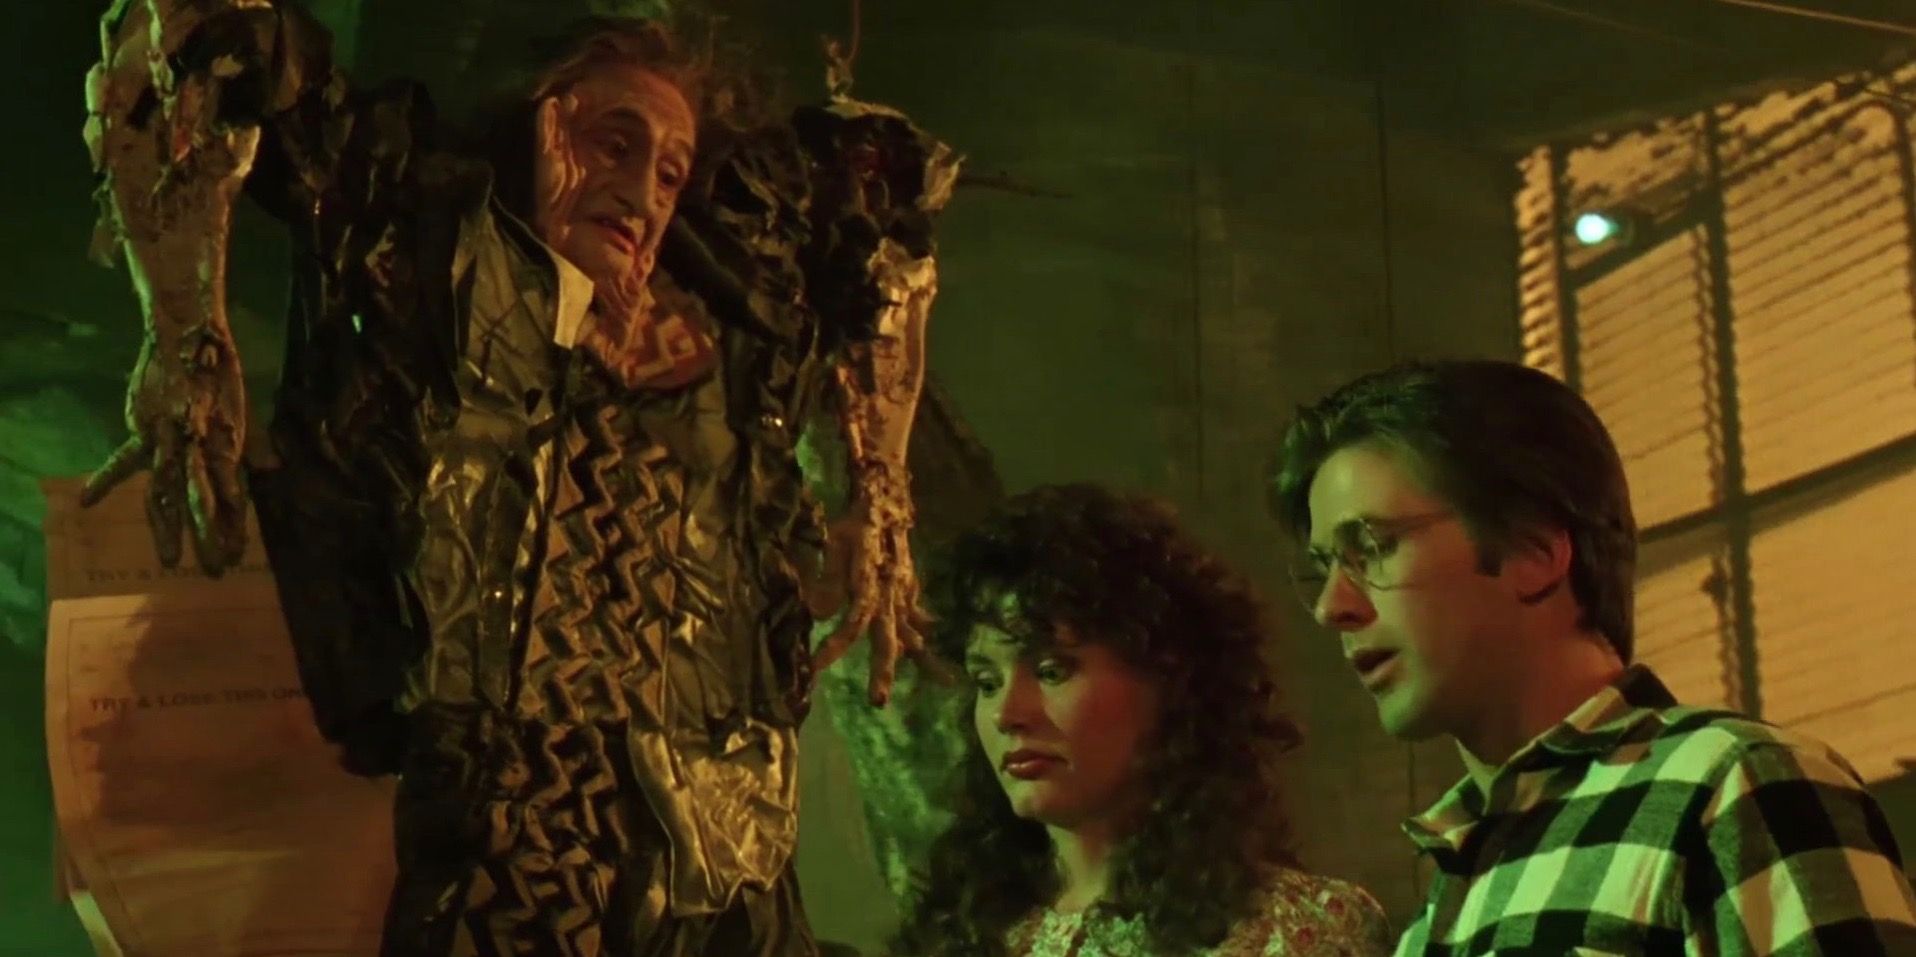 Adam and Barbara in Beetlejuice talking to the flat dead man.